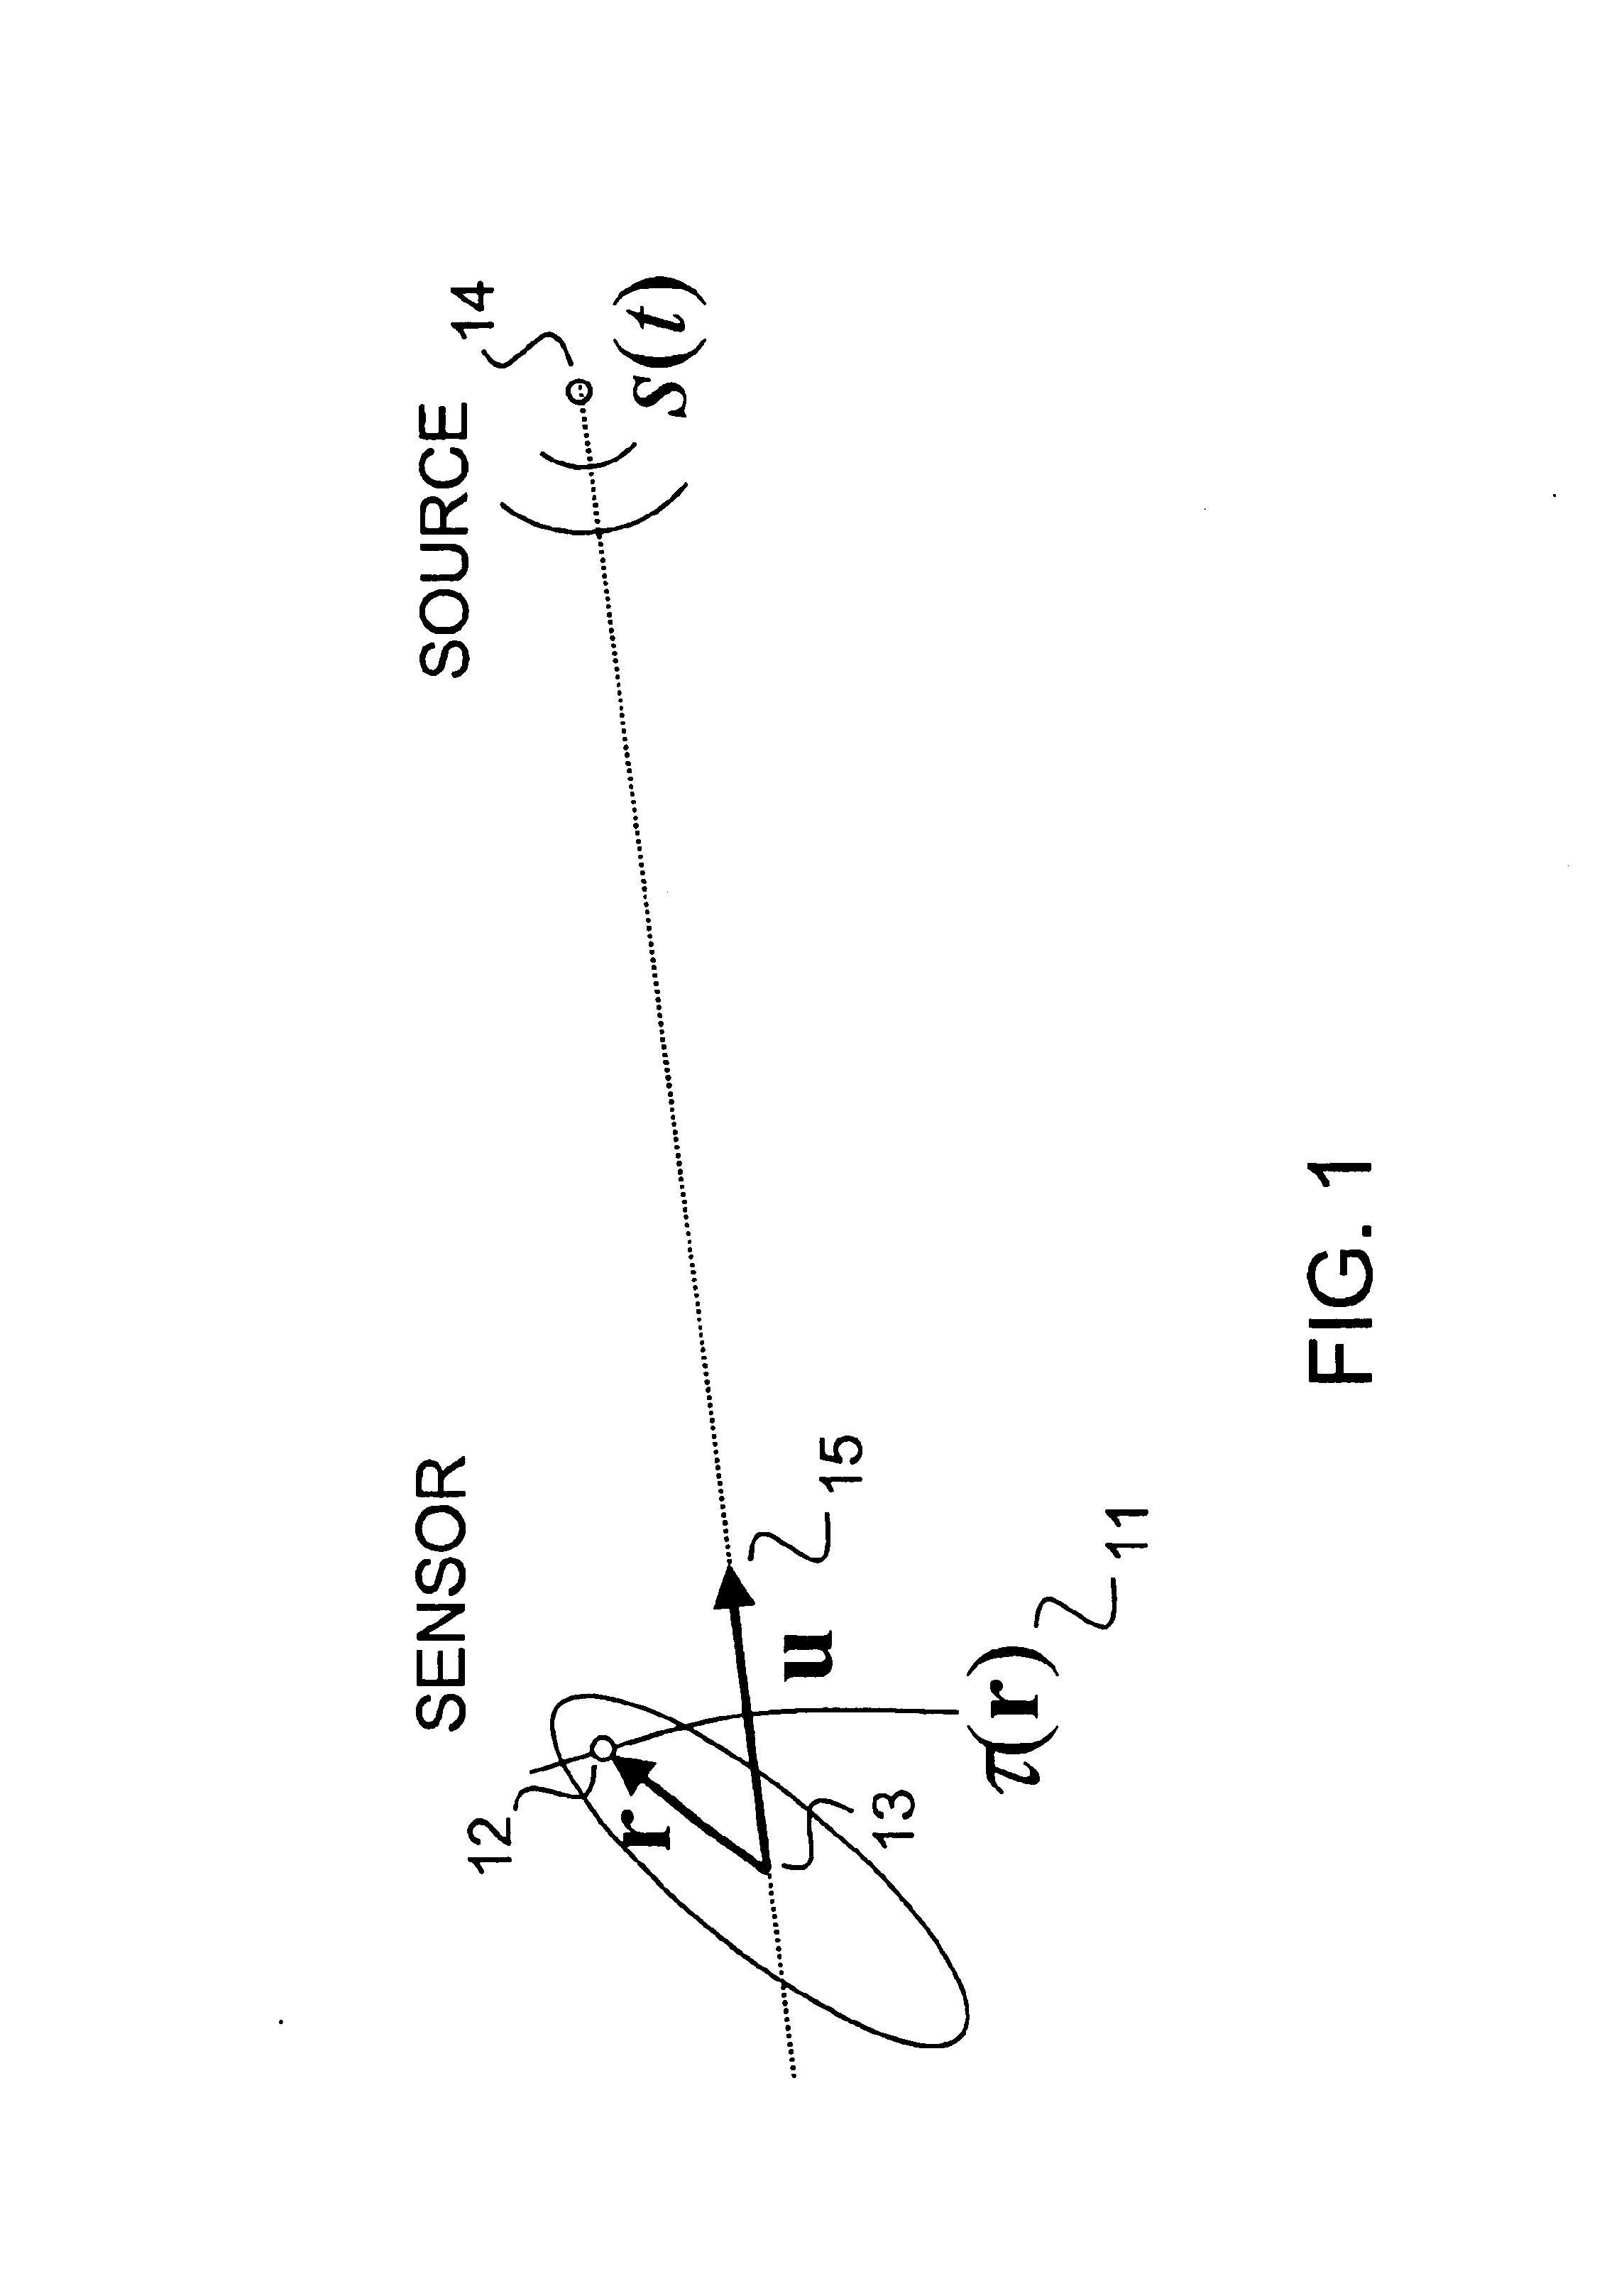 Method for gradient flow source localization and signal separation